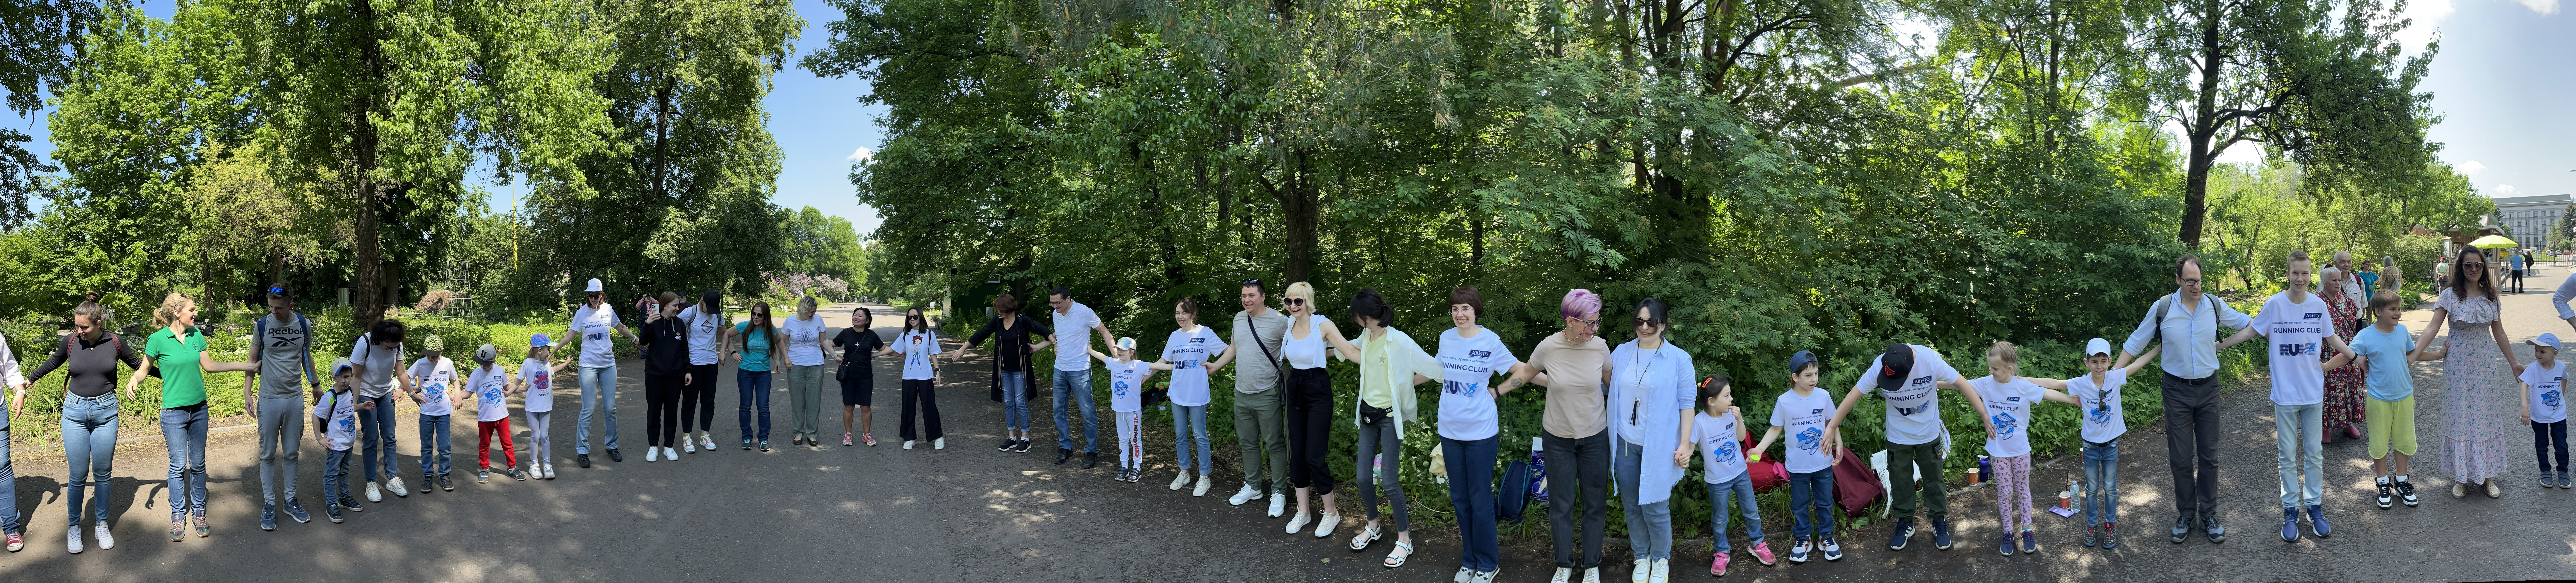 The working day of May 26 started for Aristo Pharma employees not as usual – with a cup of coffee at the ceremony of shovels and garden tools distribution in the Botanical Garden of Moscow State University.  The Ecological Day was held for Aristo Pharma Russia office, Moscow and Moscow region employees and their kids not for the first time. The children have been waiting for this day in a special way – they prepared drawings and made crafts on the topic “How Aristo helps nature”. All young painters received bars of chocolate and wooden birdhouse blanks. This really warm and sunny day passed amazing for all of us – in work and communication in the fresh air. All together we dug a big ditch for planting, planted hedge rows, made the order in the garden and visited a chestnut planted by us two years ago, it bloomed this year for the first time. Our team was happy to contribute into the environment and make the work of the Botanical Garden employees a little easier.